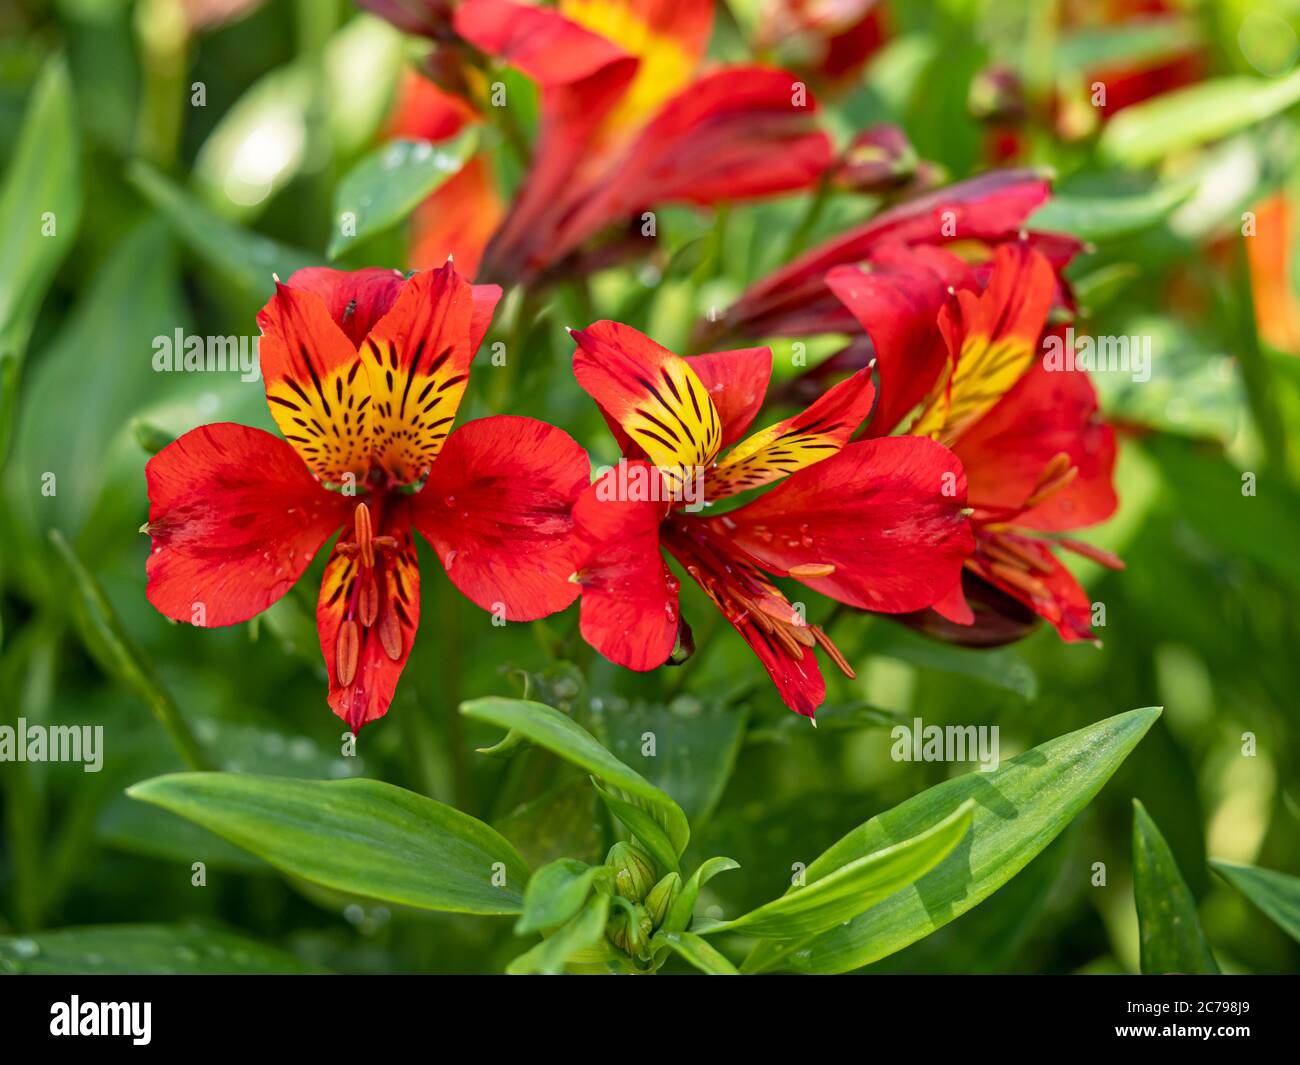 Closeup of the beautiful orange and yellow flowers of the Peruvian lily Alstroemeria Moulin Rouge Stock Photo